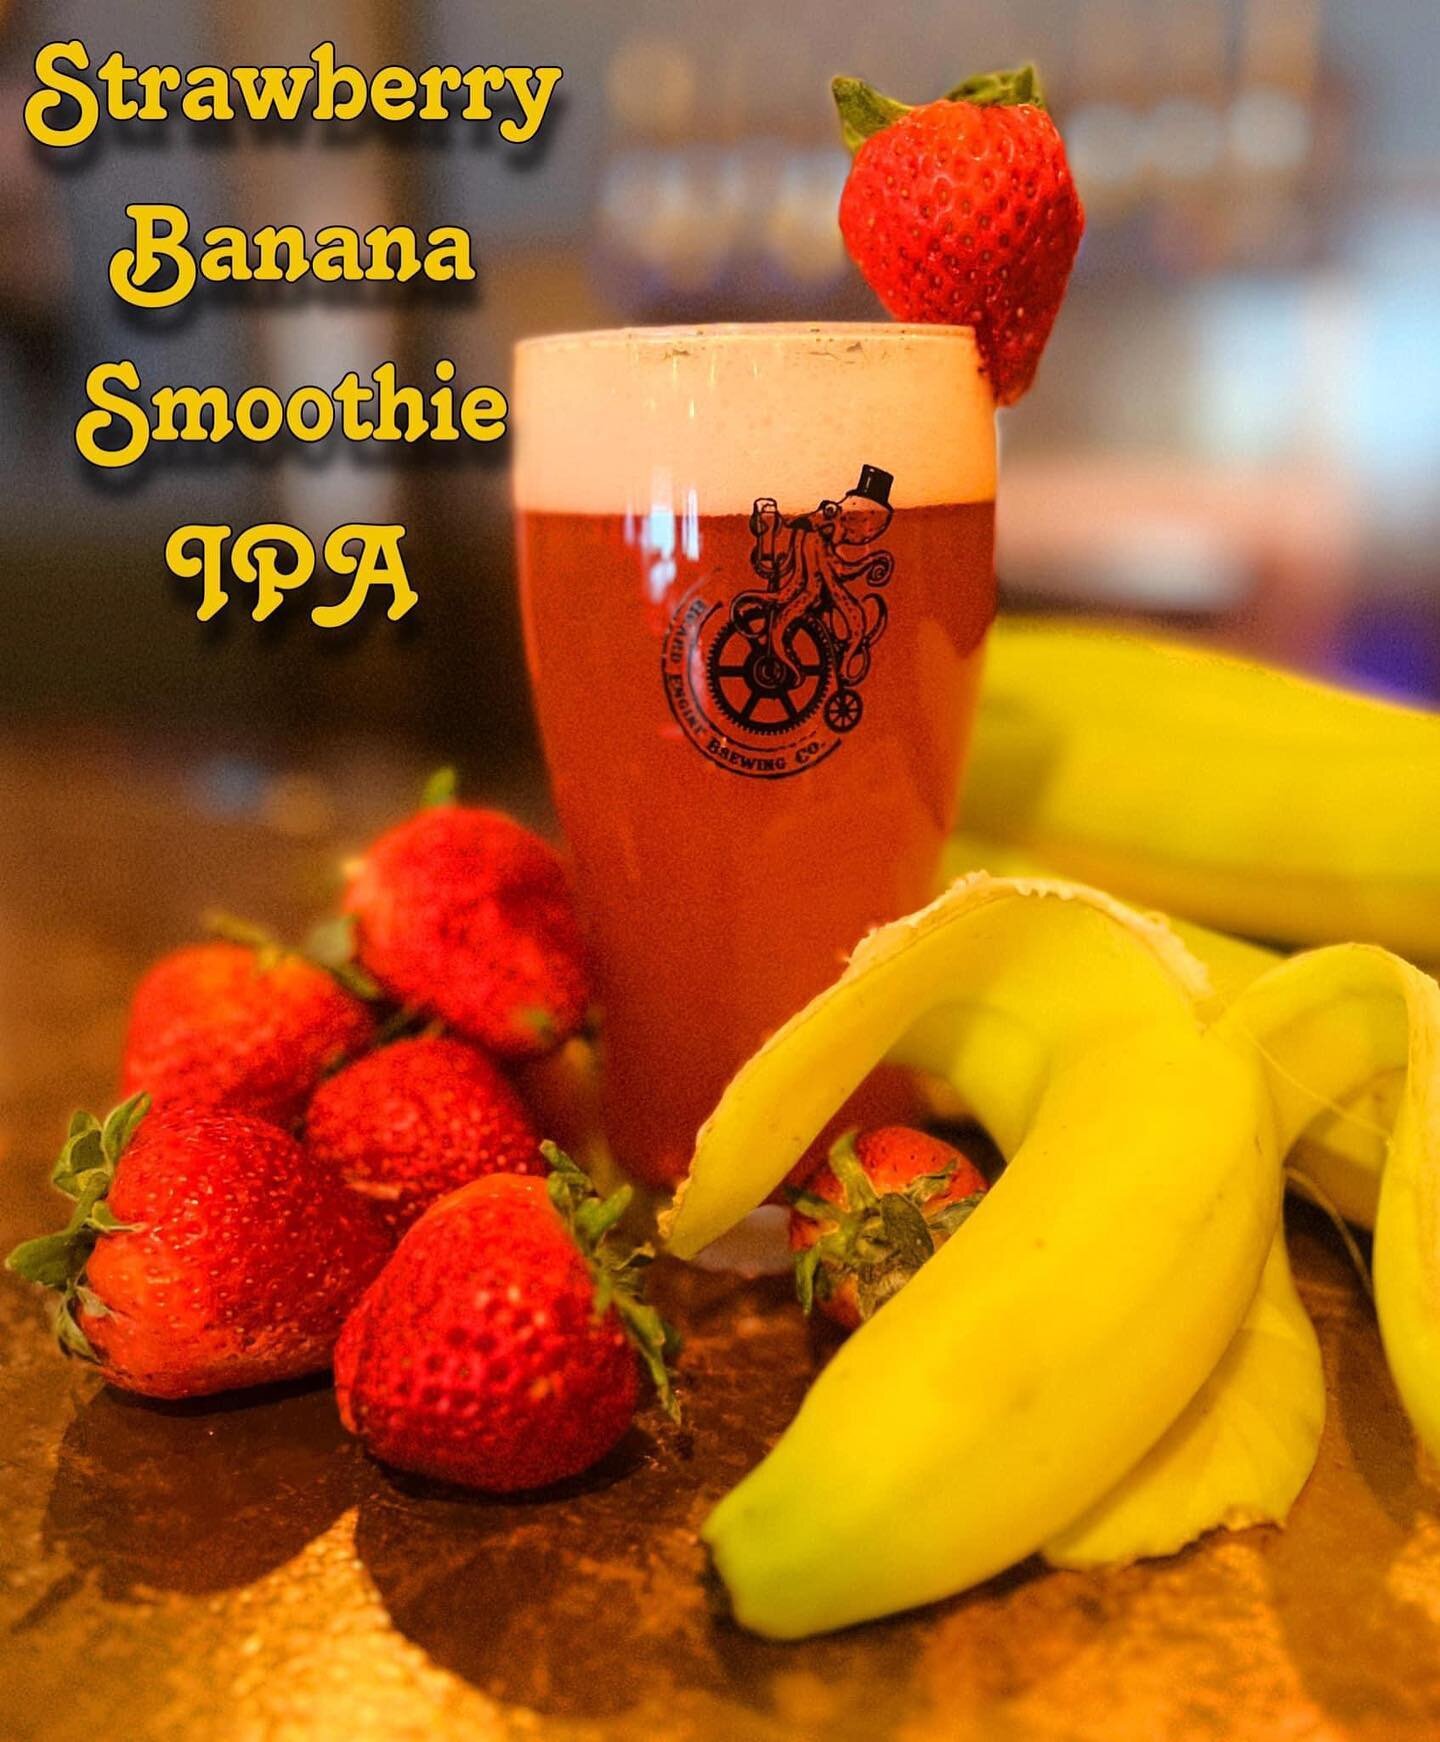 🚨Firkin Friday is Here 🚨

🍓🍌Today 5pm we tap the Strawberry Banana Smoothie IPA🍓🍌 and after venting the cask this morning,we got to taste a bit and it&rsquo;s pretty incredible. No doubt about it,it&rsquo;s strawberry banana! 

A sub category u